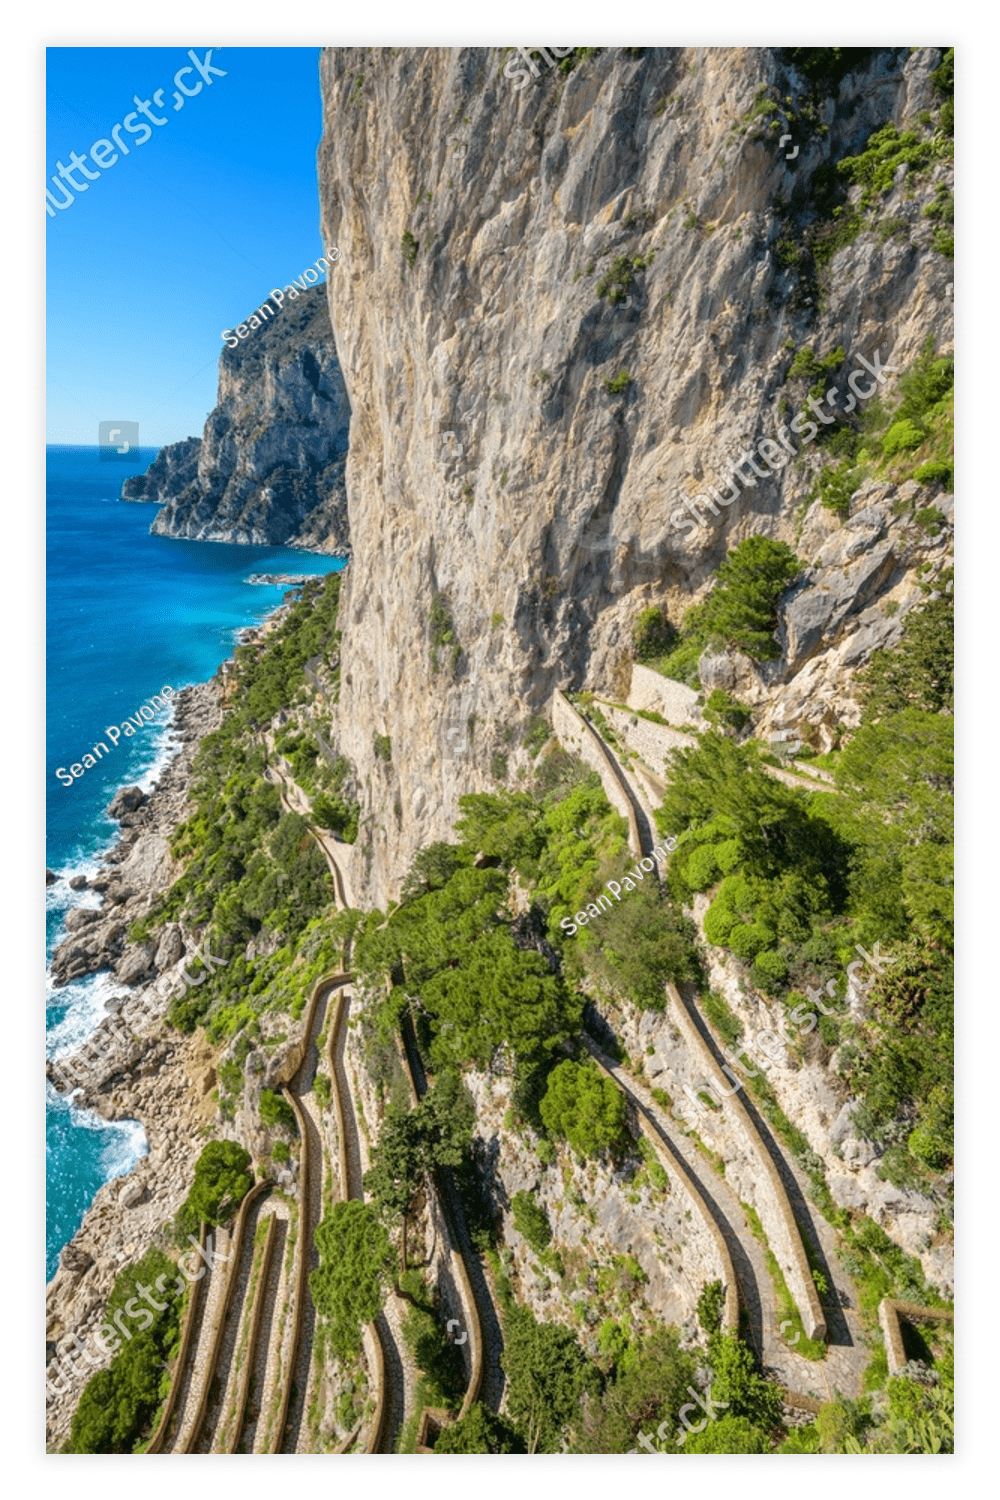 Capri, Italy from the Gardens of Augustus viewed over Via Krupp.